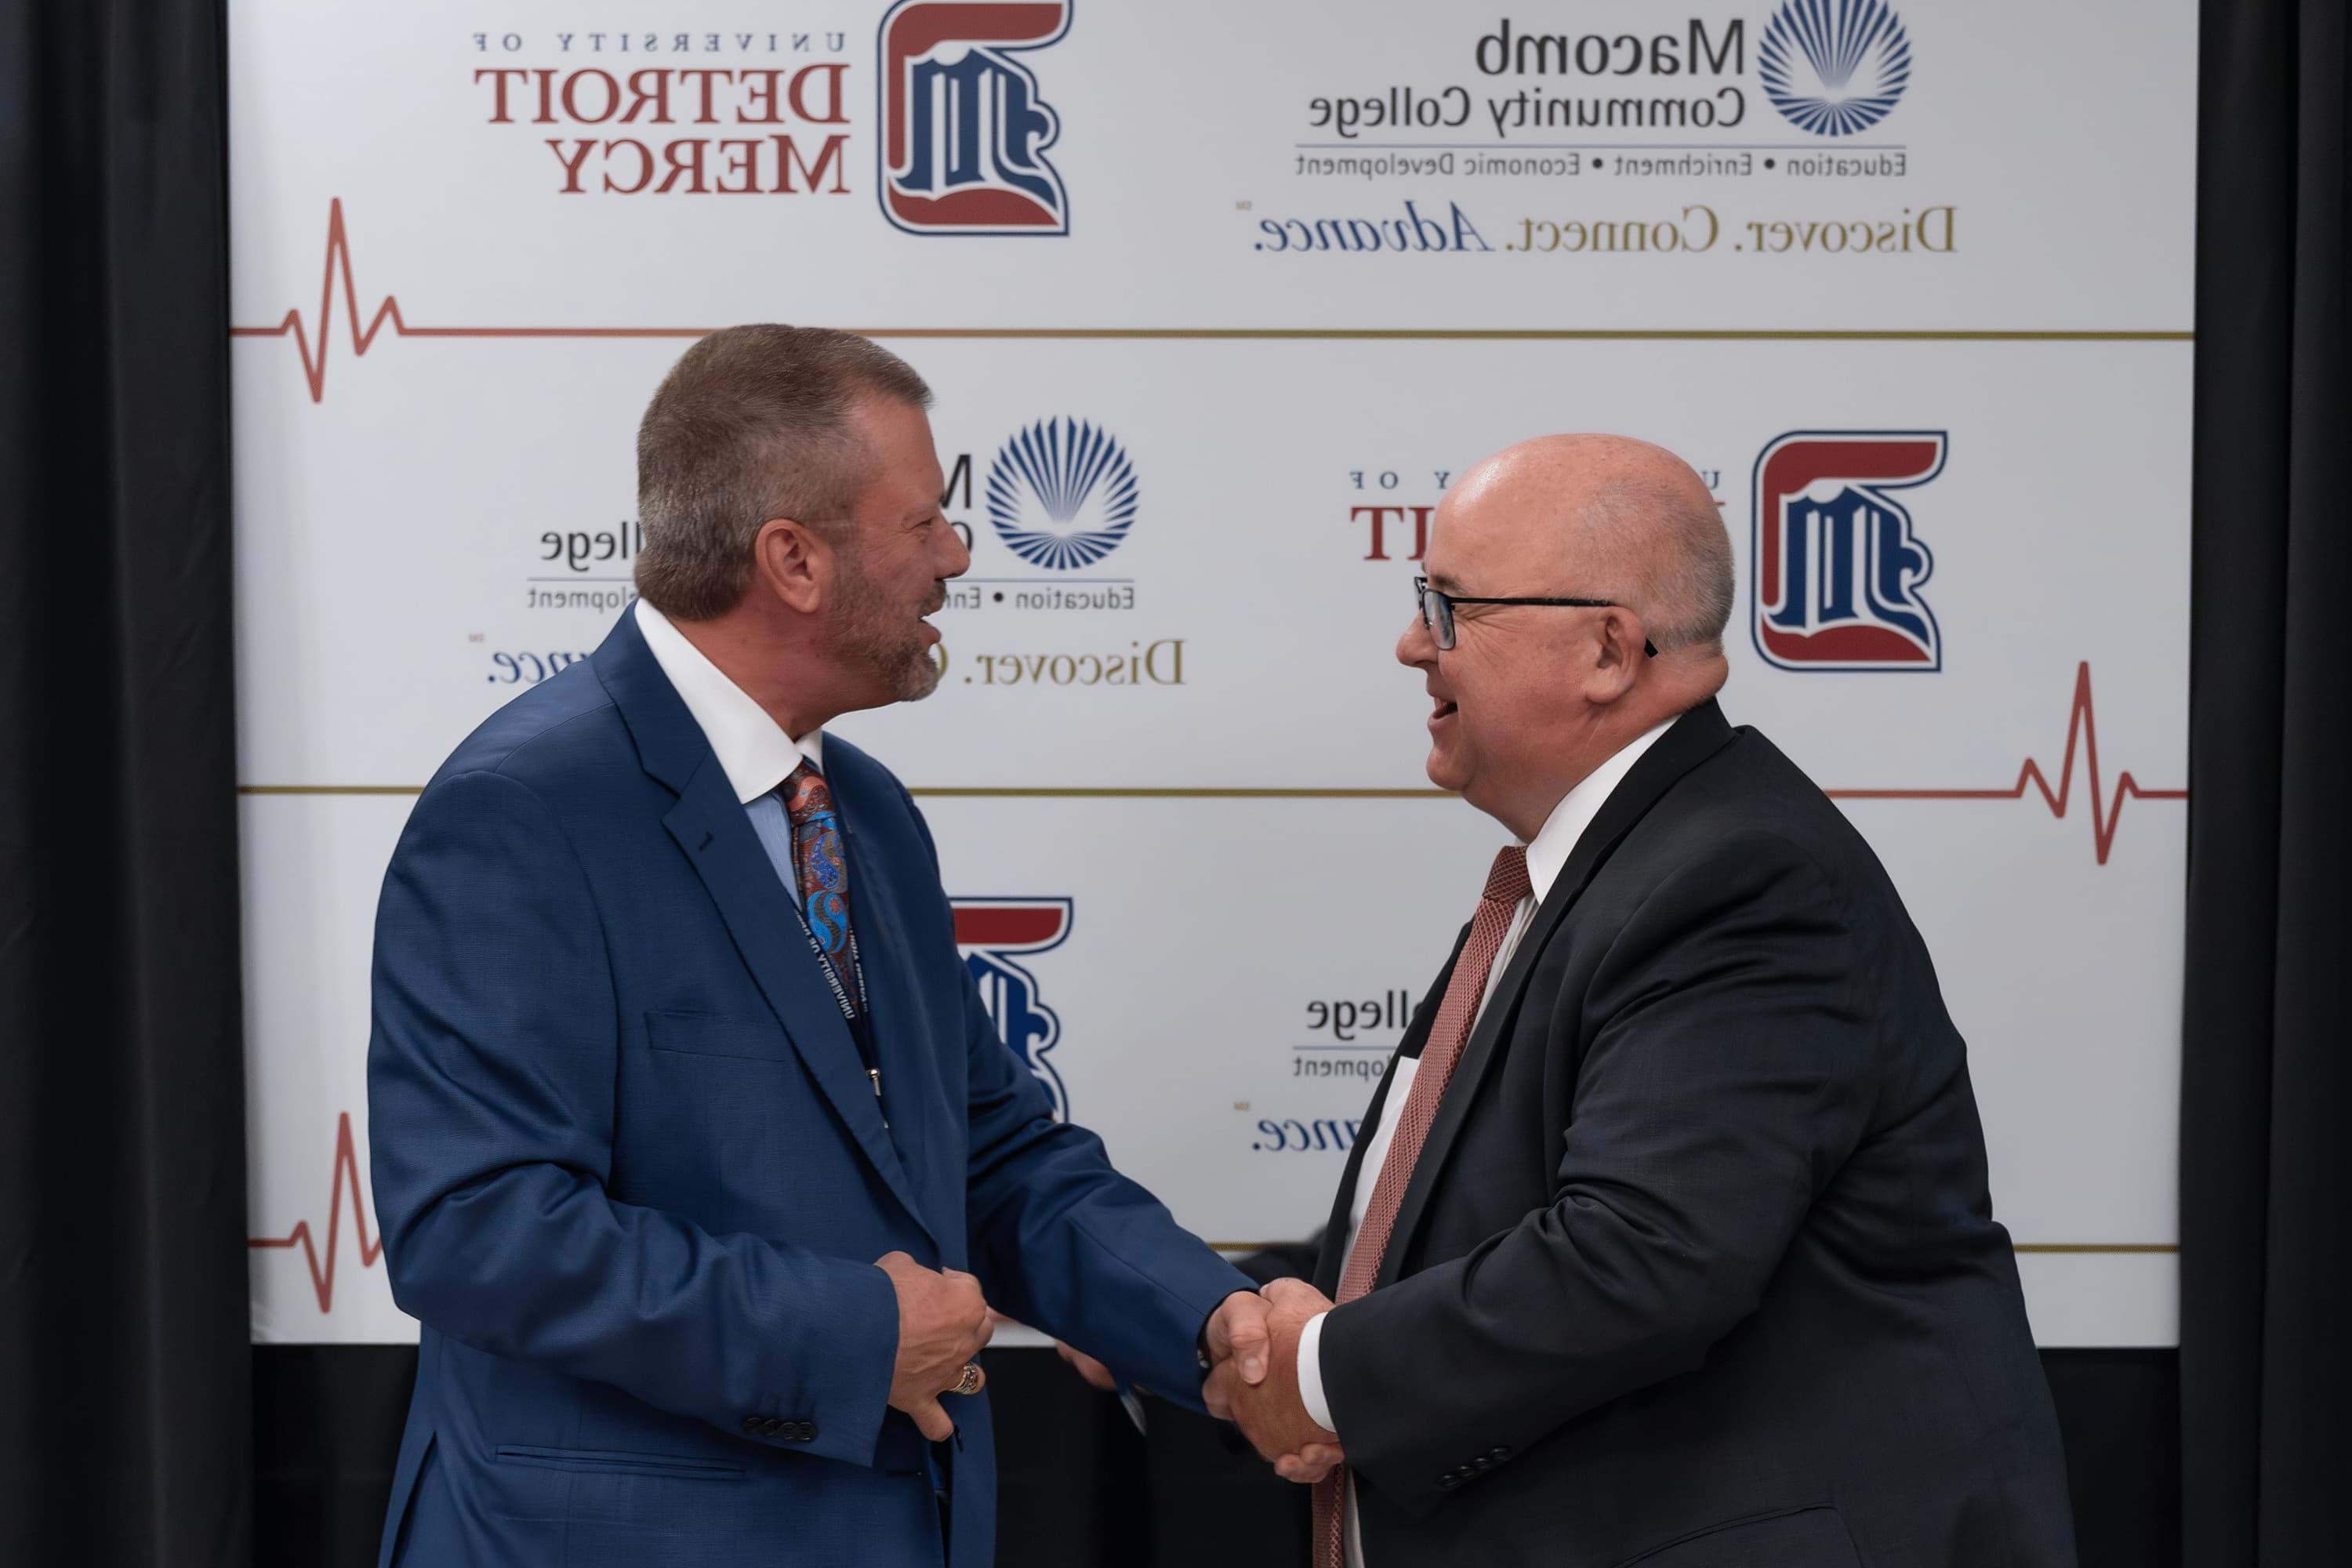 Two men smile and shake hands and look at each other, with logos for University of Detroit Mercy and Macomb Community College on a board behind them.